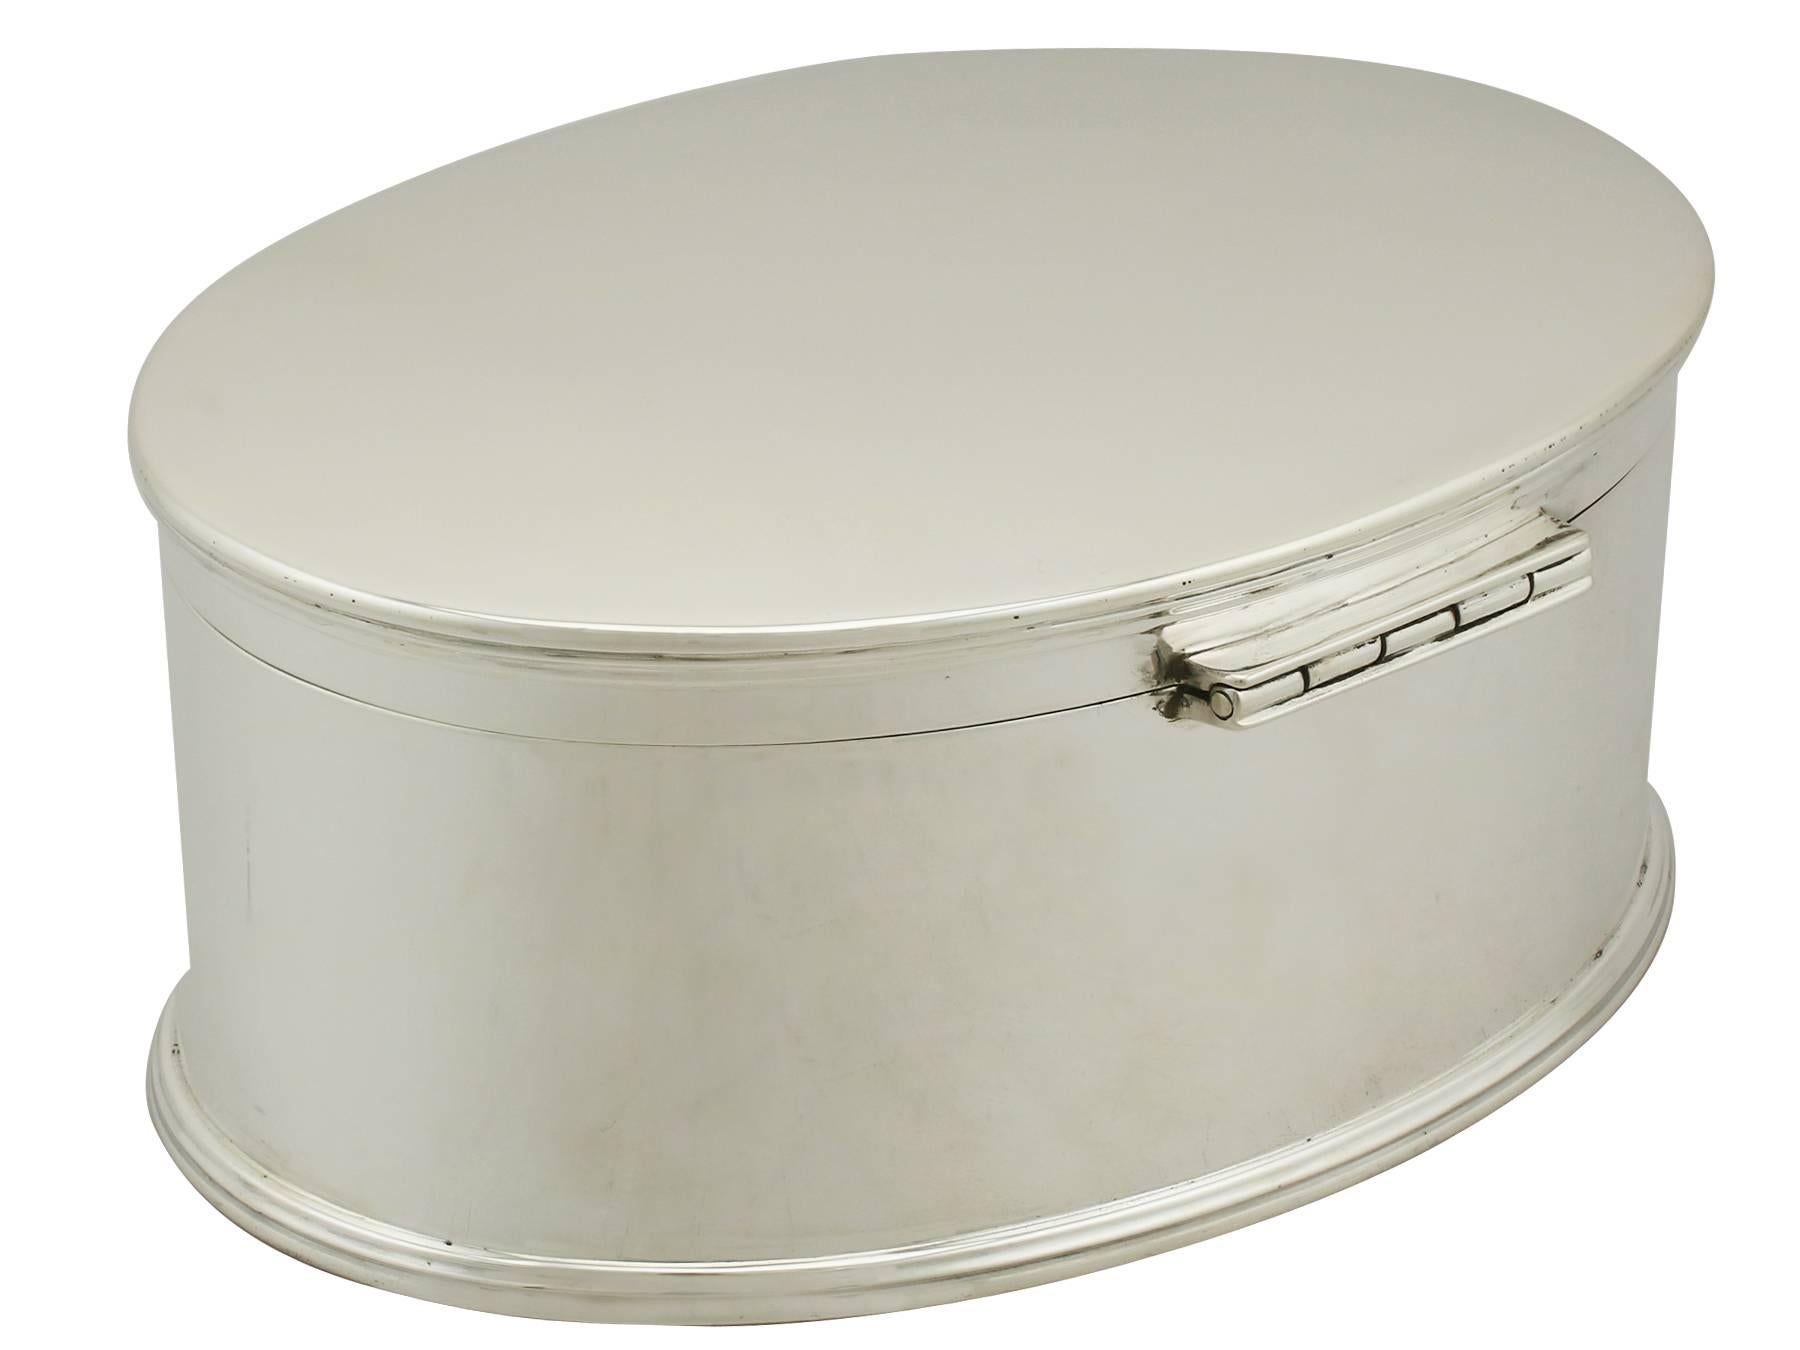 An exceptional, fine and impressive antique George V English sterling silver biscuit box; an addition to our silver teaware collection.

This exceptional antique George V sterling silver biscuit box has a plain oval form to a spreading